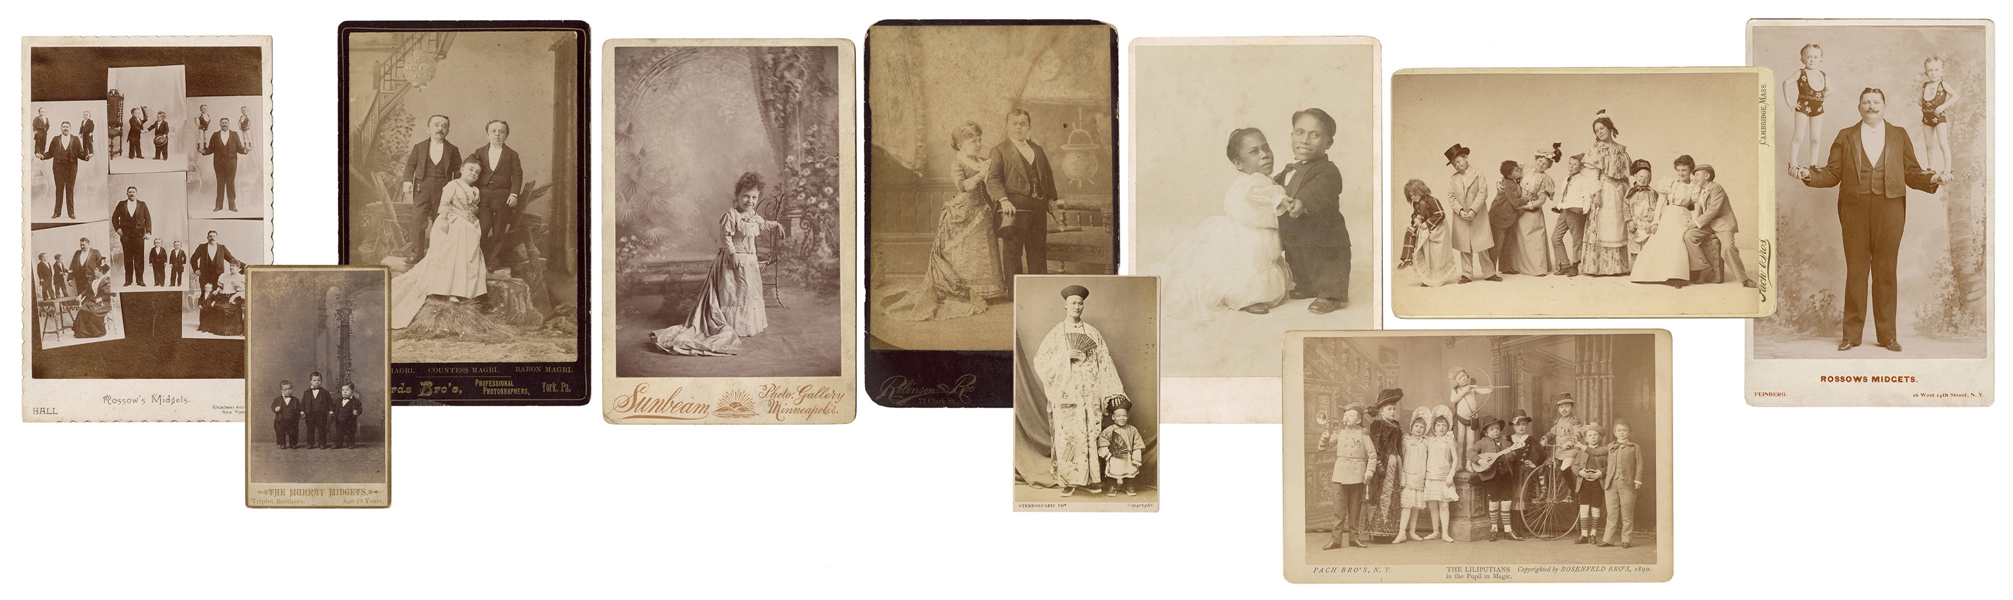  Ten Cabinet Cards and CDV Photographs of Little People. Cir...